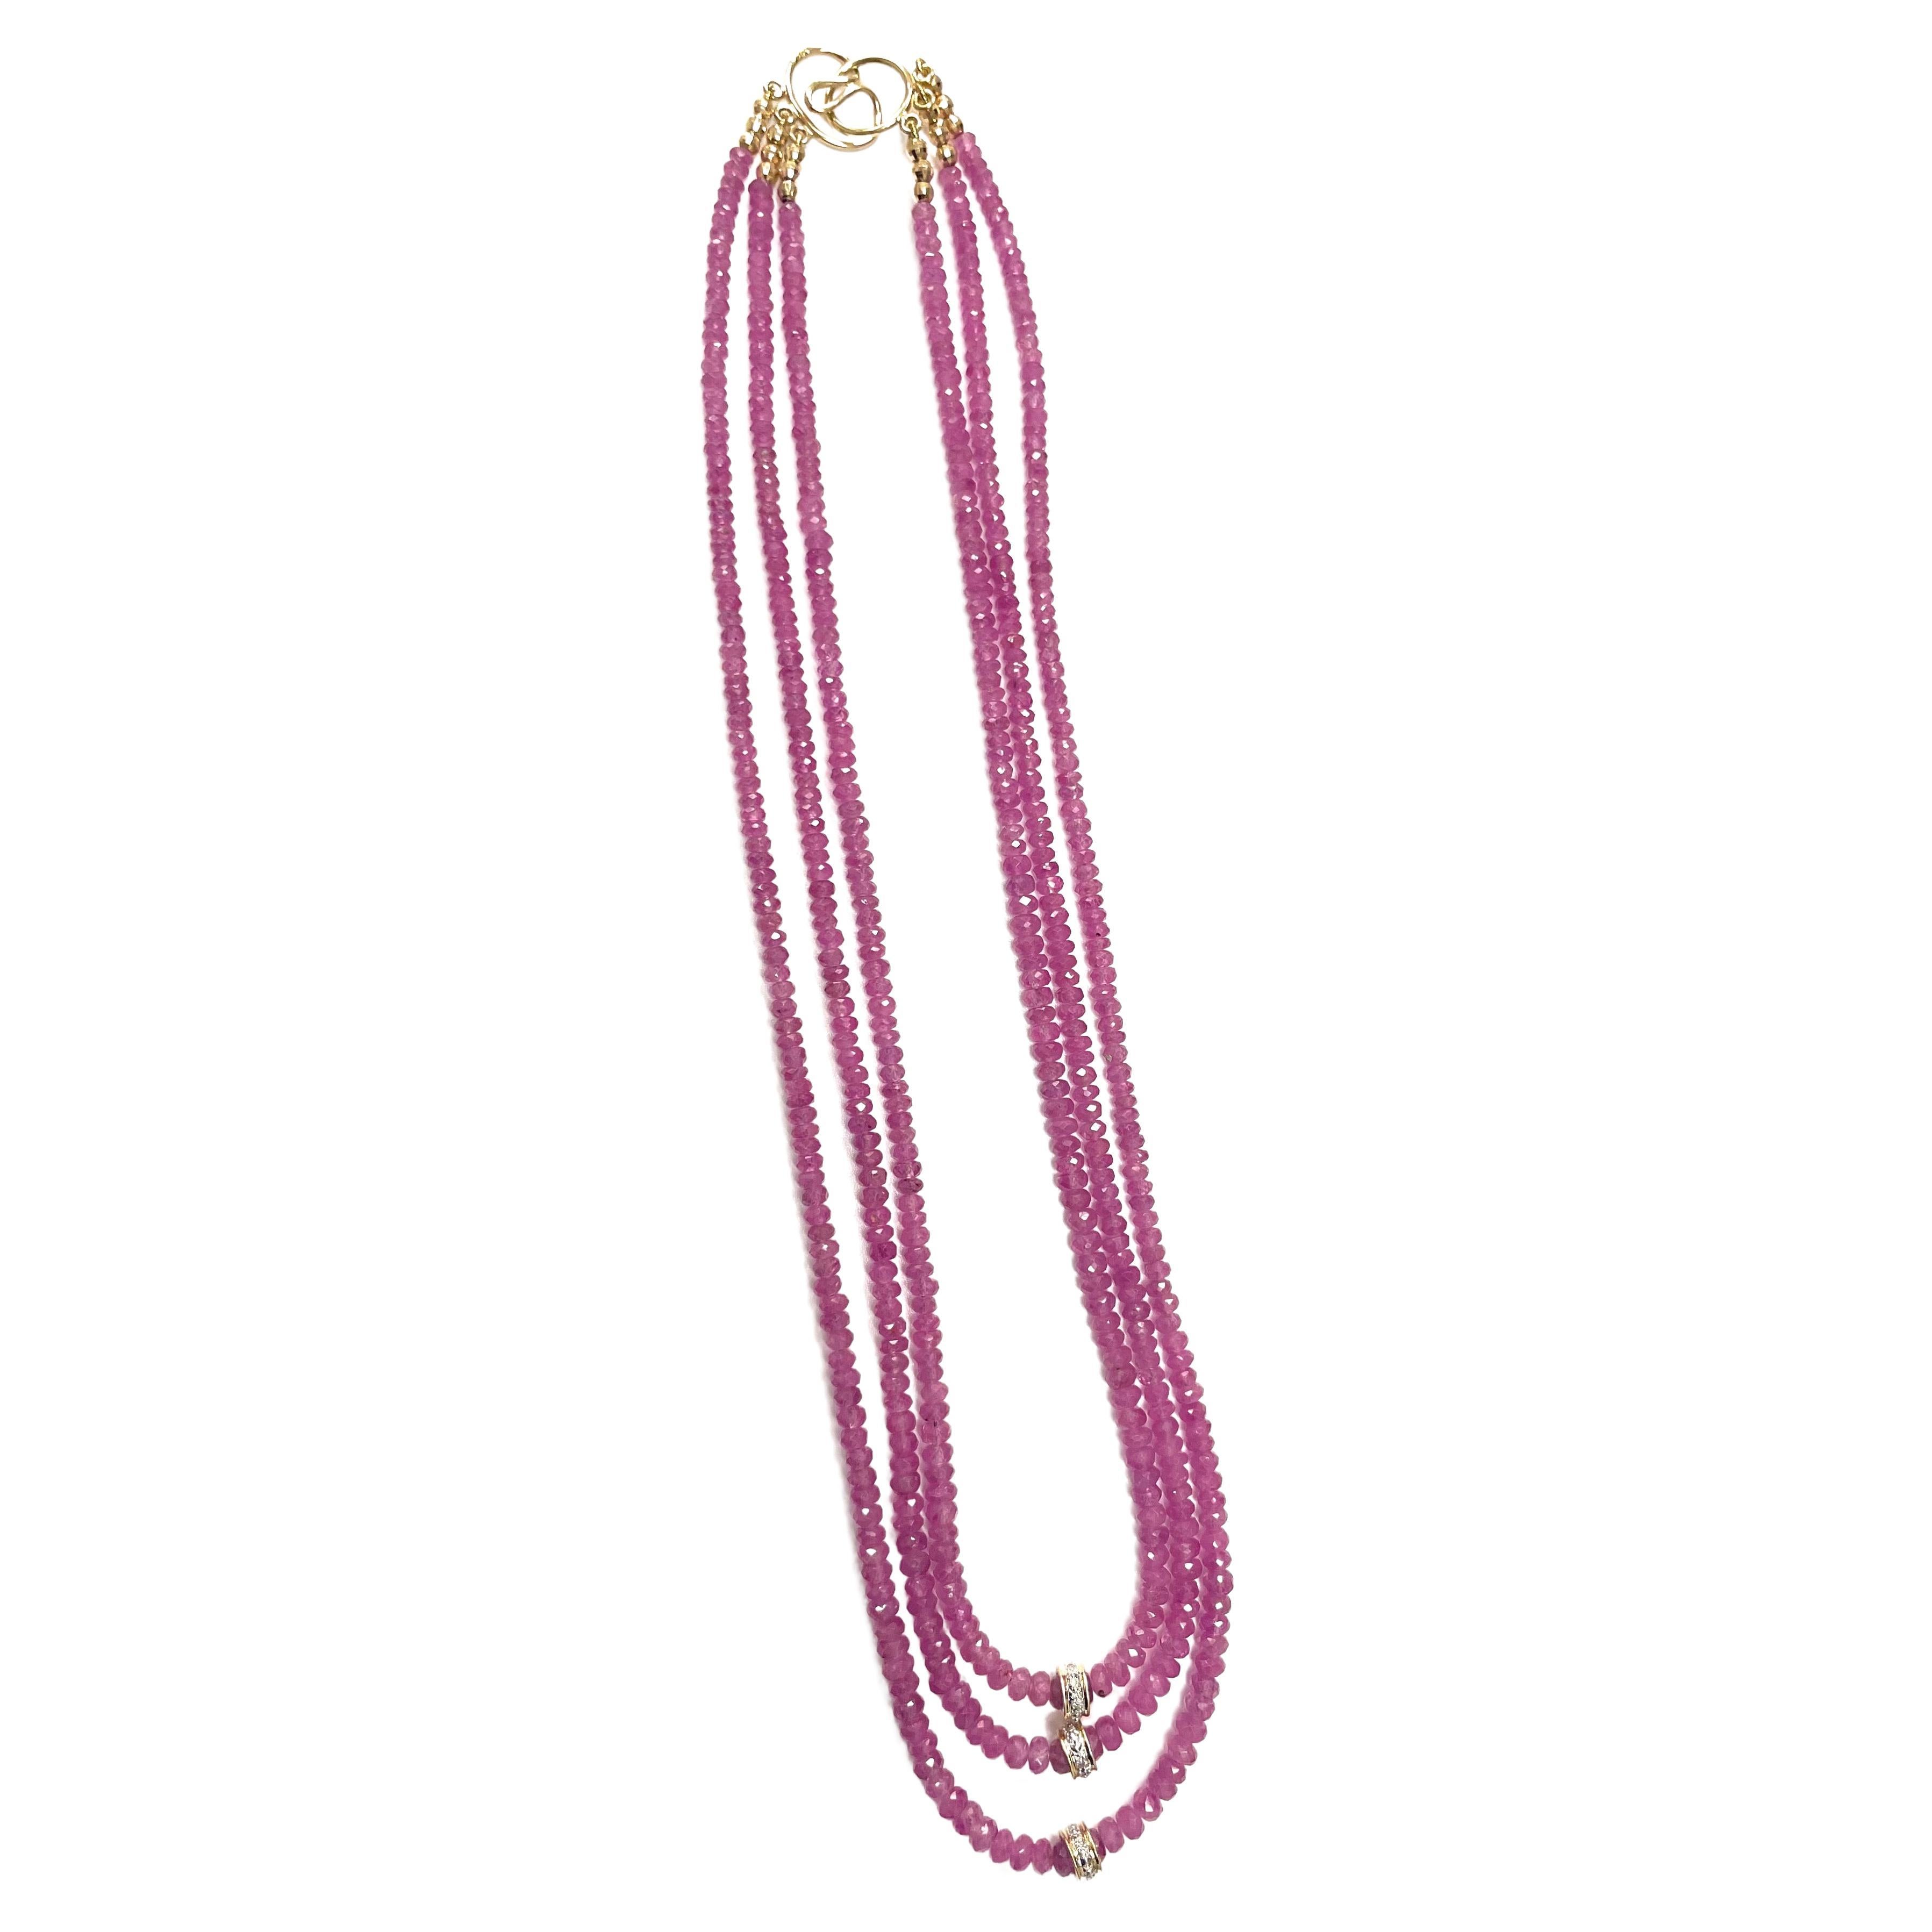 Description
Vibrant pink, superior quality sapphire three strand necklace adorned with a pave diamond center accent on each strand and a user friendly interlocking clasp.
Item # N2895

Materials and Weight
Pink sapphires, 178cts, 4mm, faceted